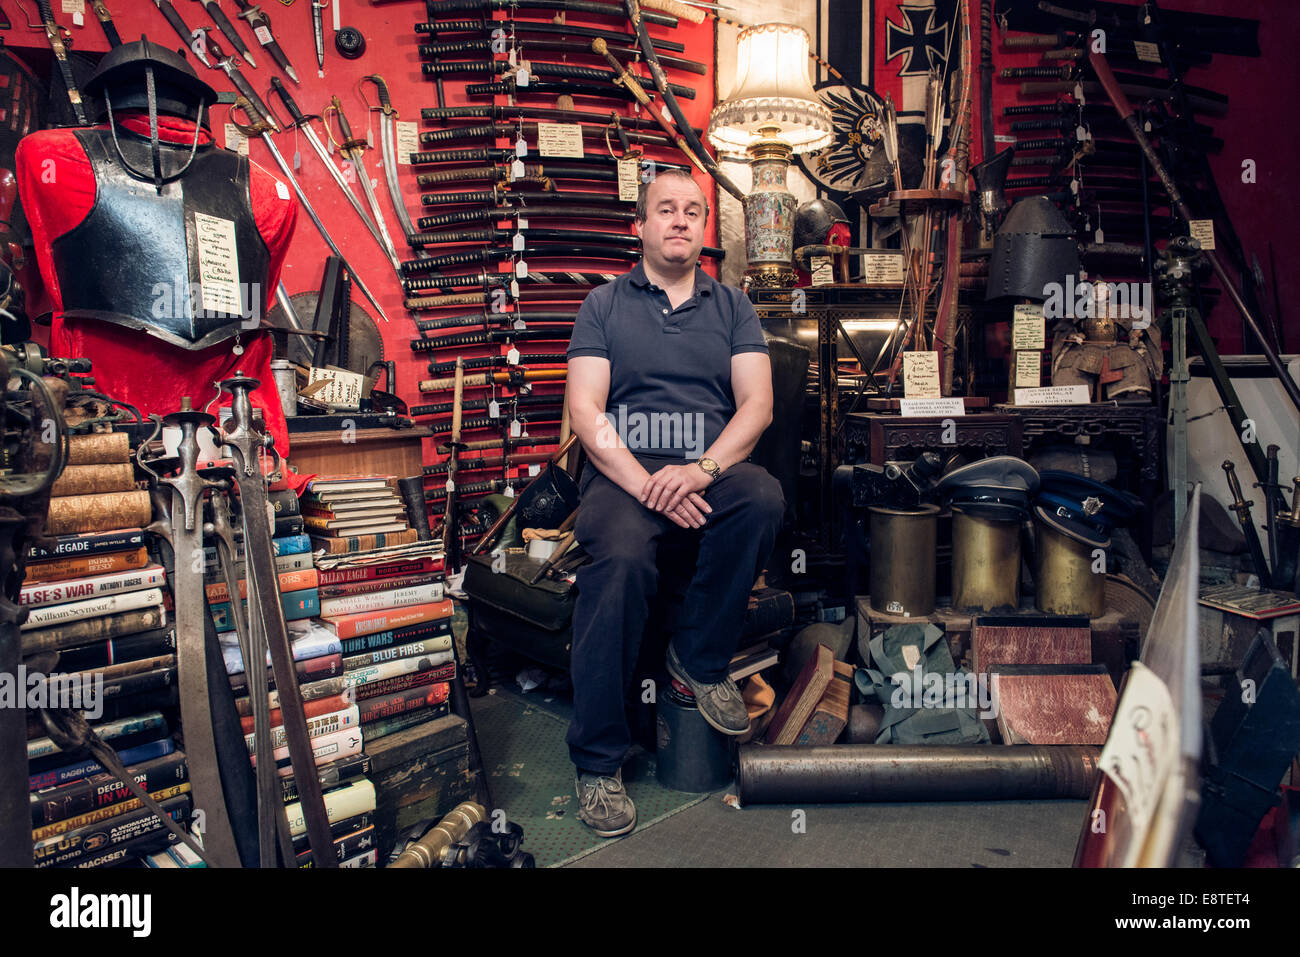 A male shopkeeper stands in his historical military antique shop surrounded by guns, swords, rifles, armor etc. Stock Photo